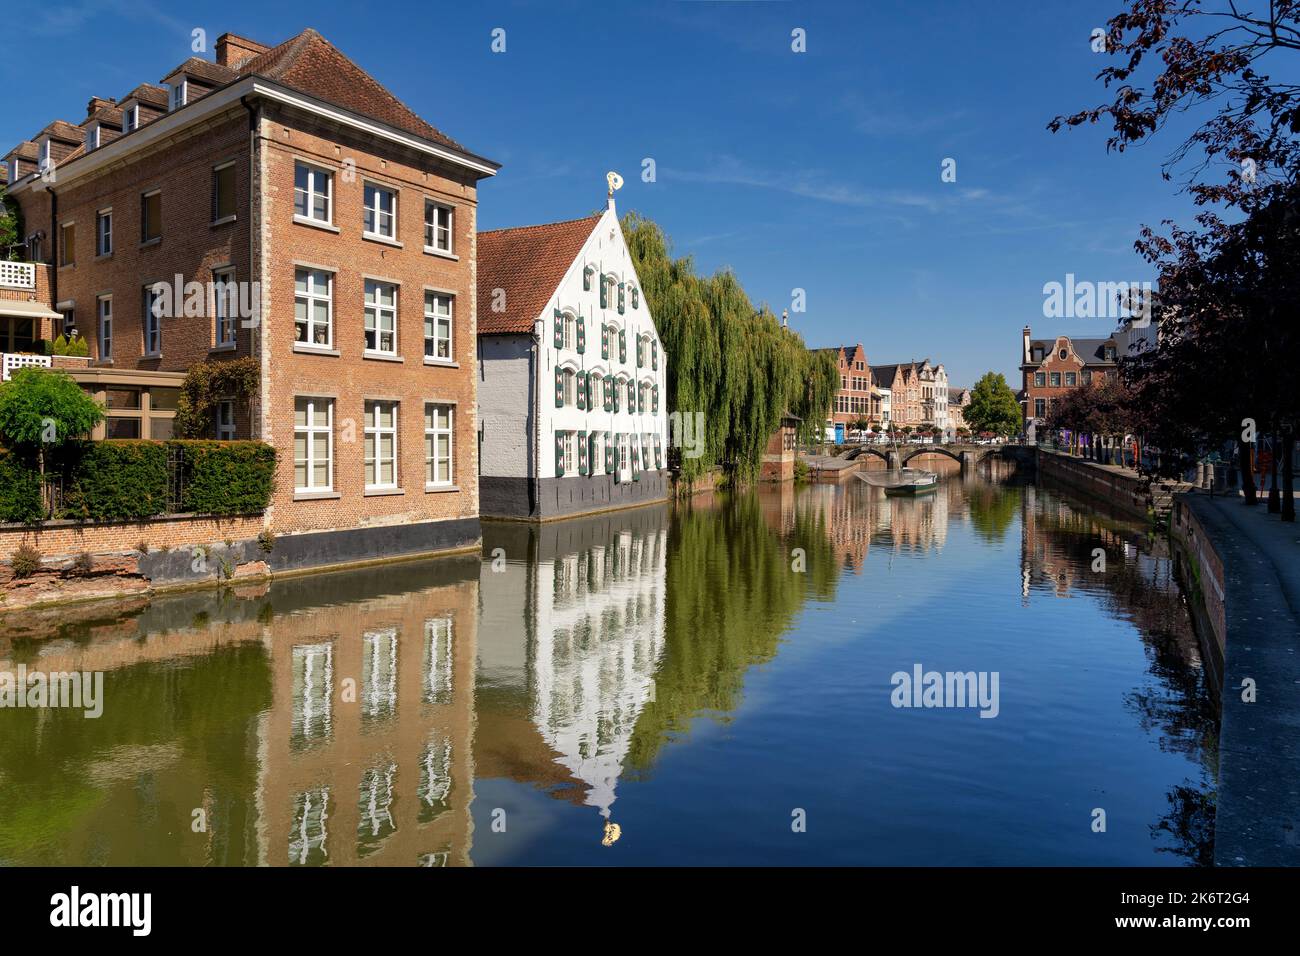 View over a canal at some monumental buildings Stock Photo